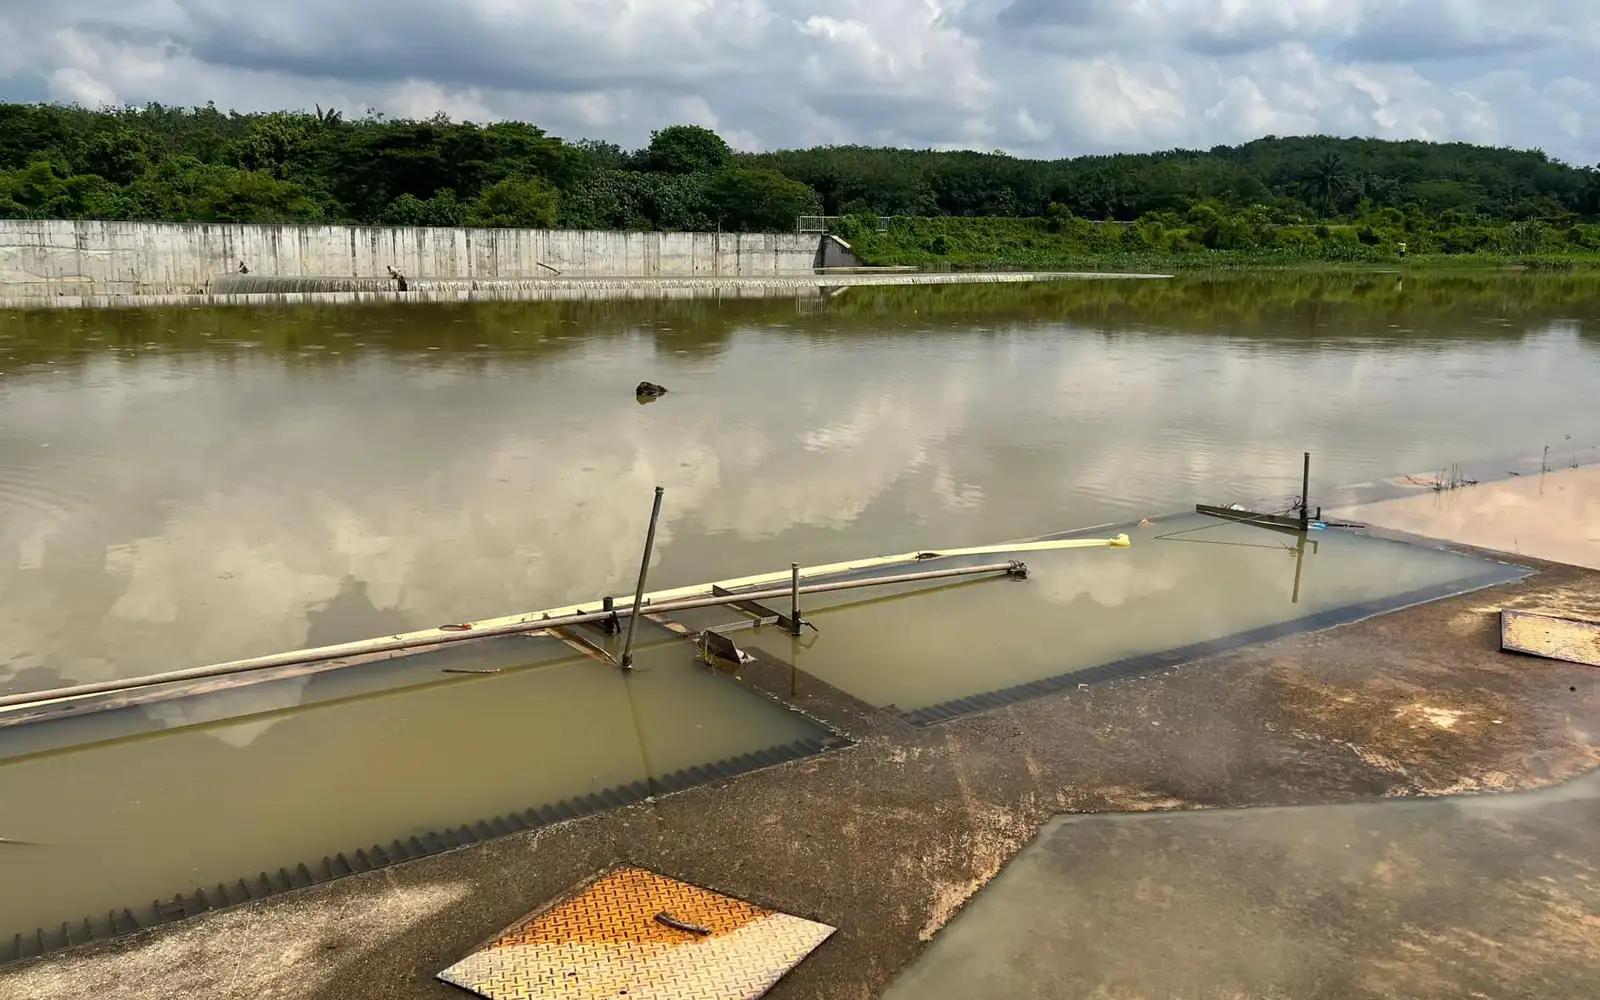  Lukut assemblyman Choo Ken Hwa said he had received more than 50 complaints of pollution in Sungai Linggi affecting water supply since 2018.